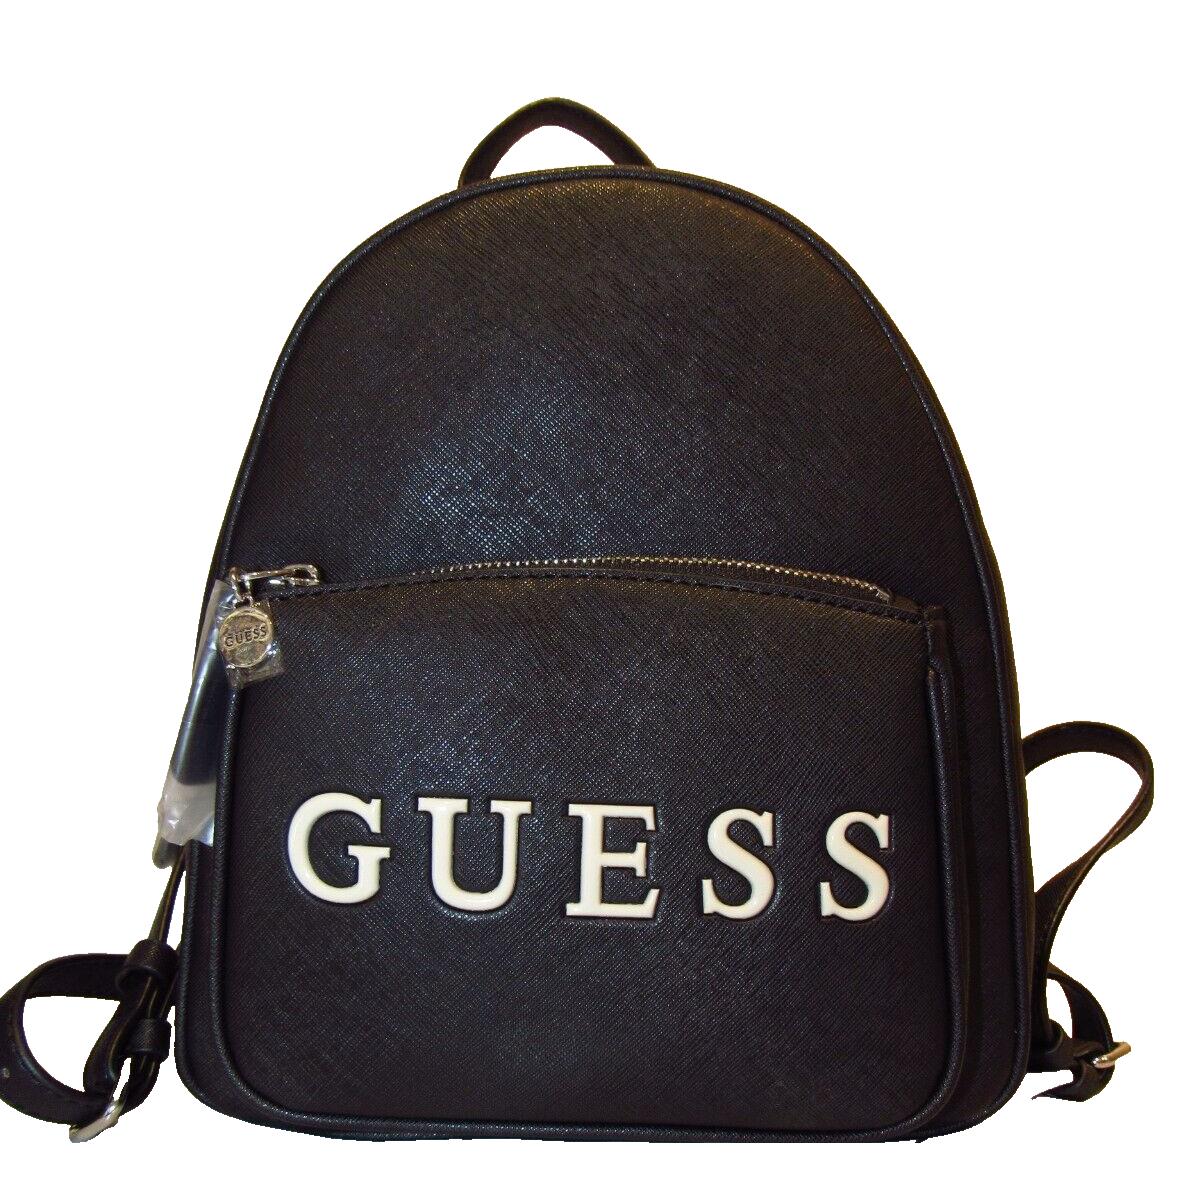 Roxbury Guess Backpack Hand/shoulder Bag in Black Free US Shipping - Exterior: Black